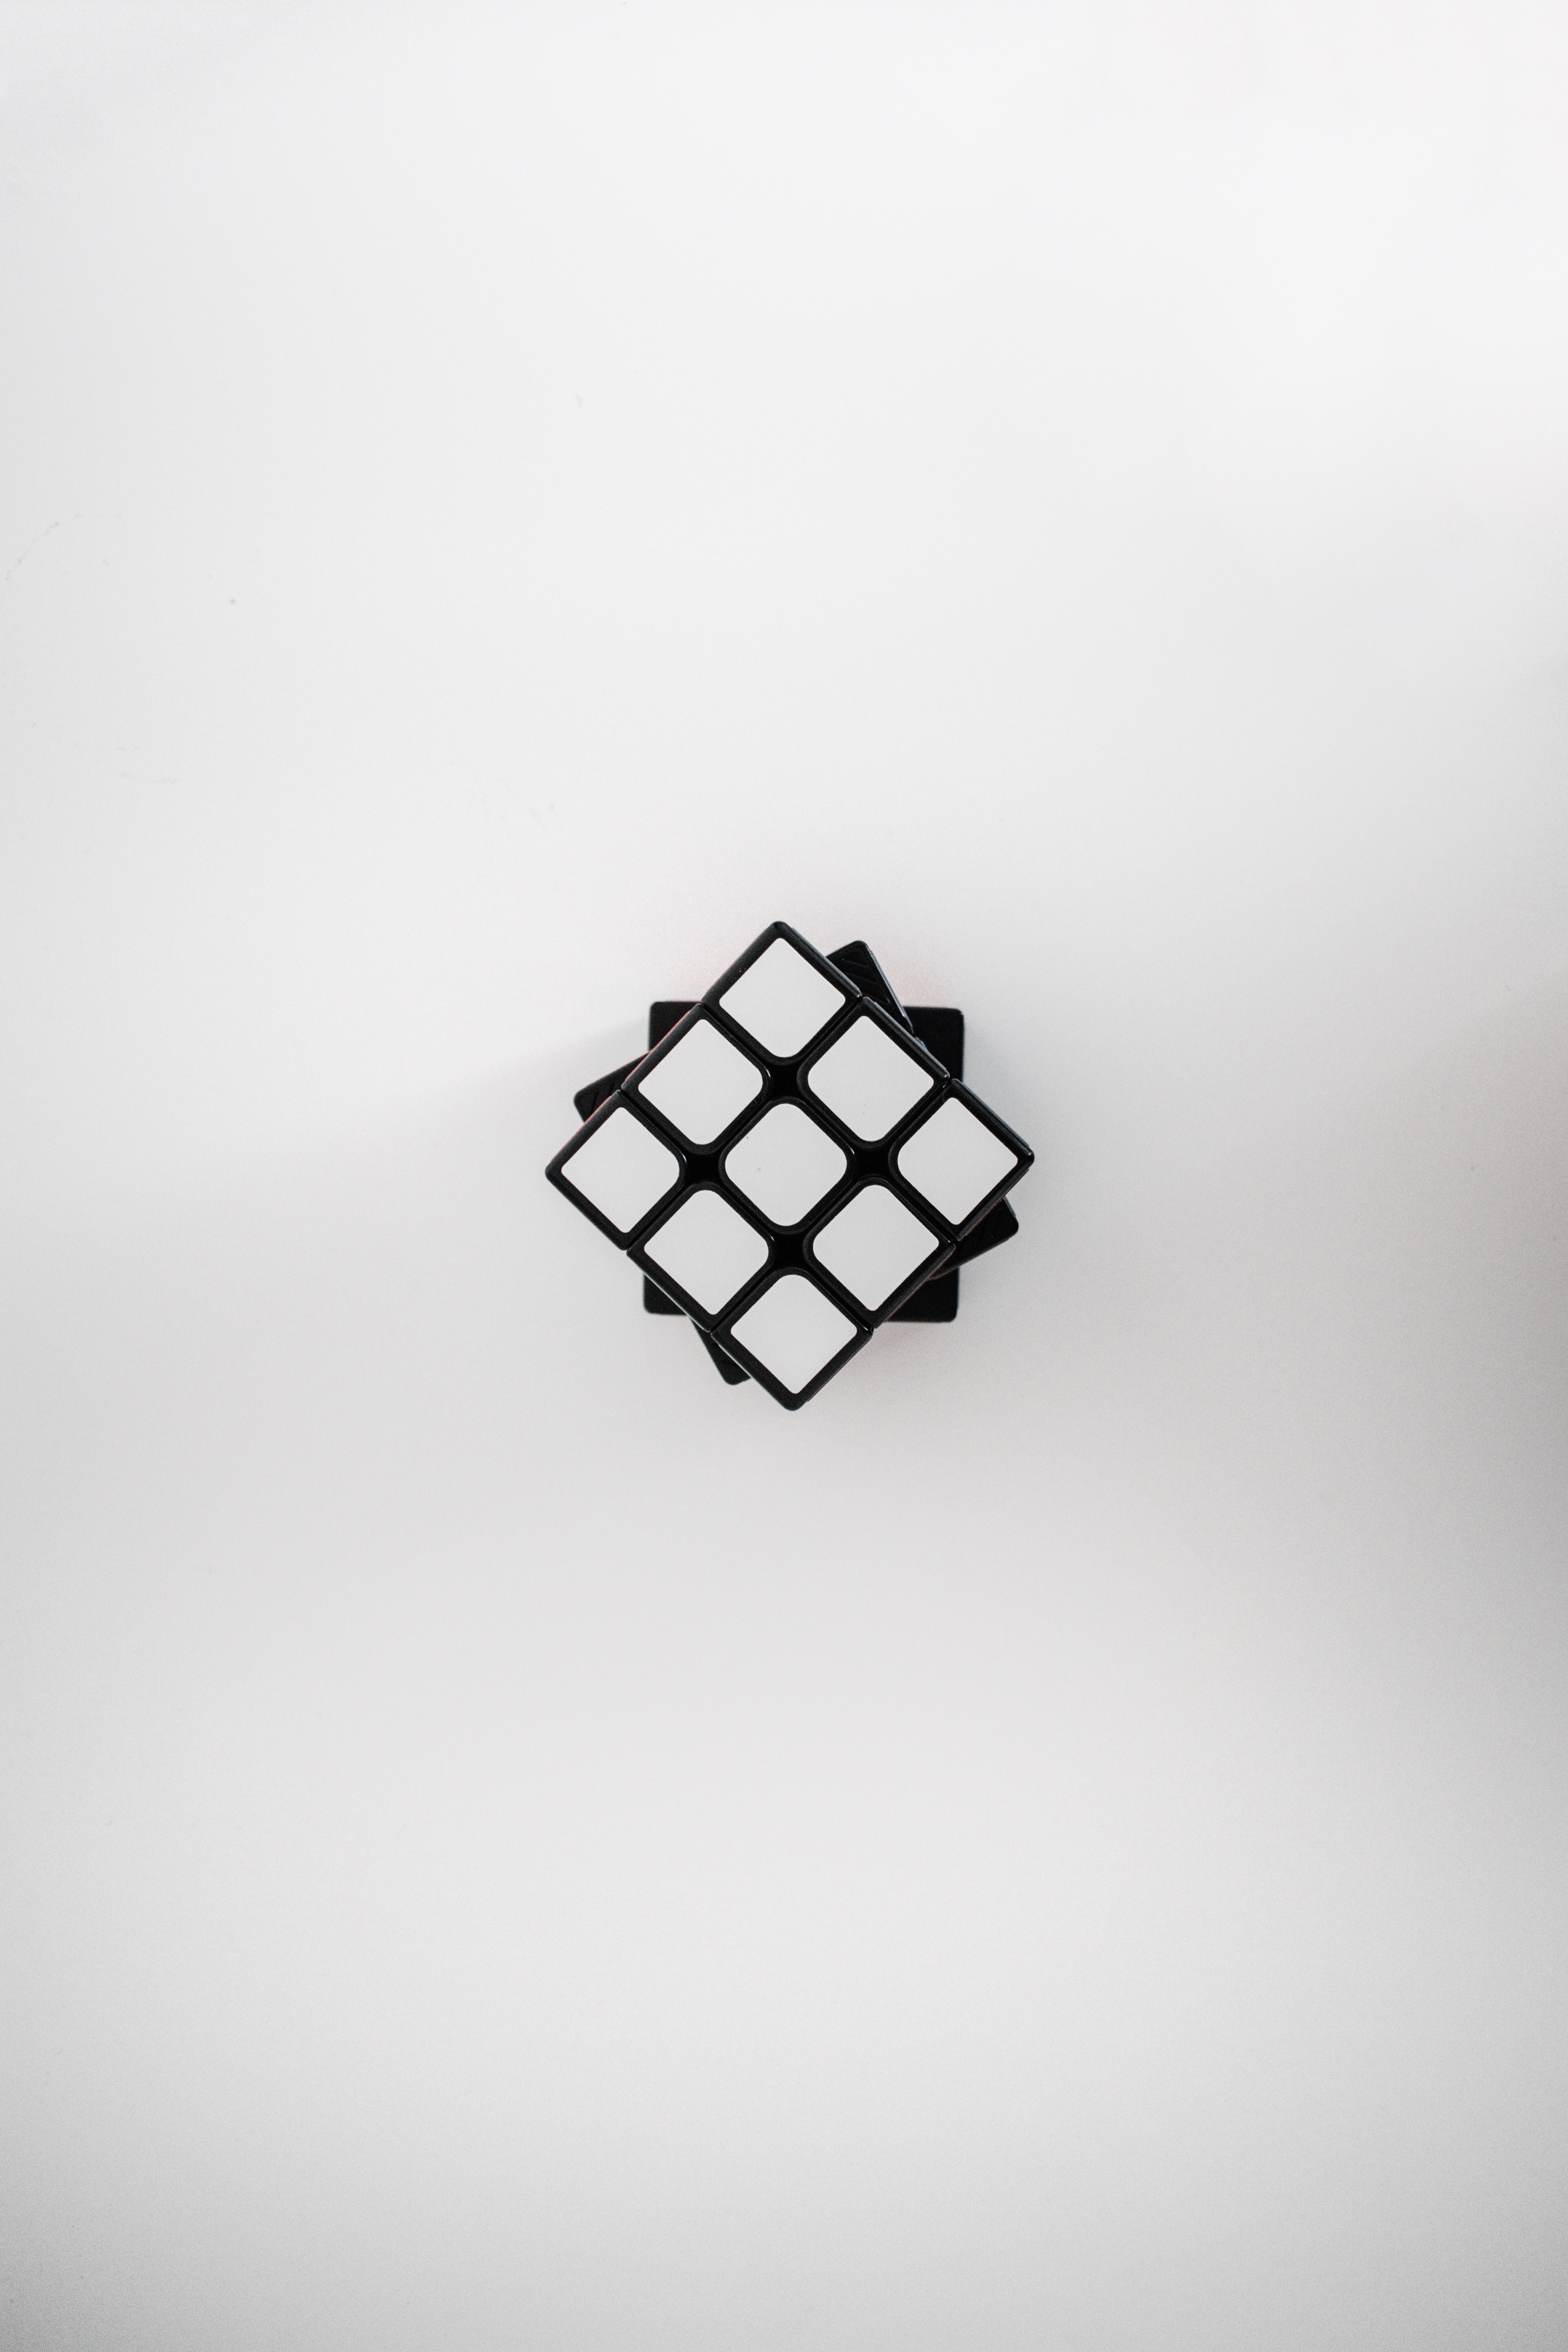 rubik's cube, miscellanea, cube, white, view from above, miscellaneous Phone Background